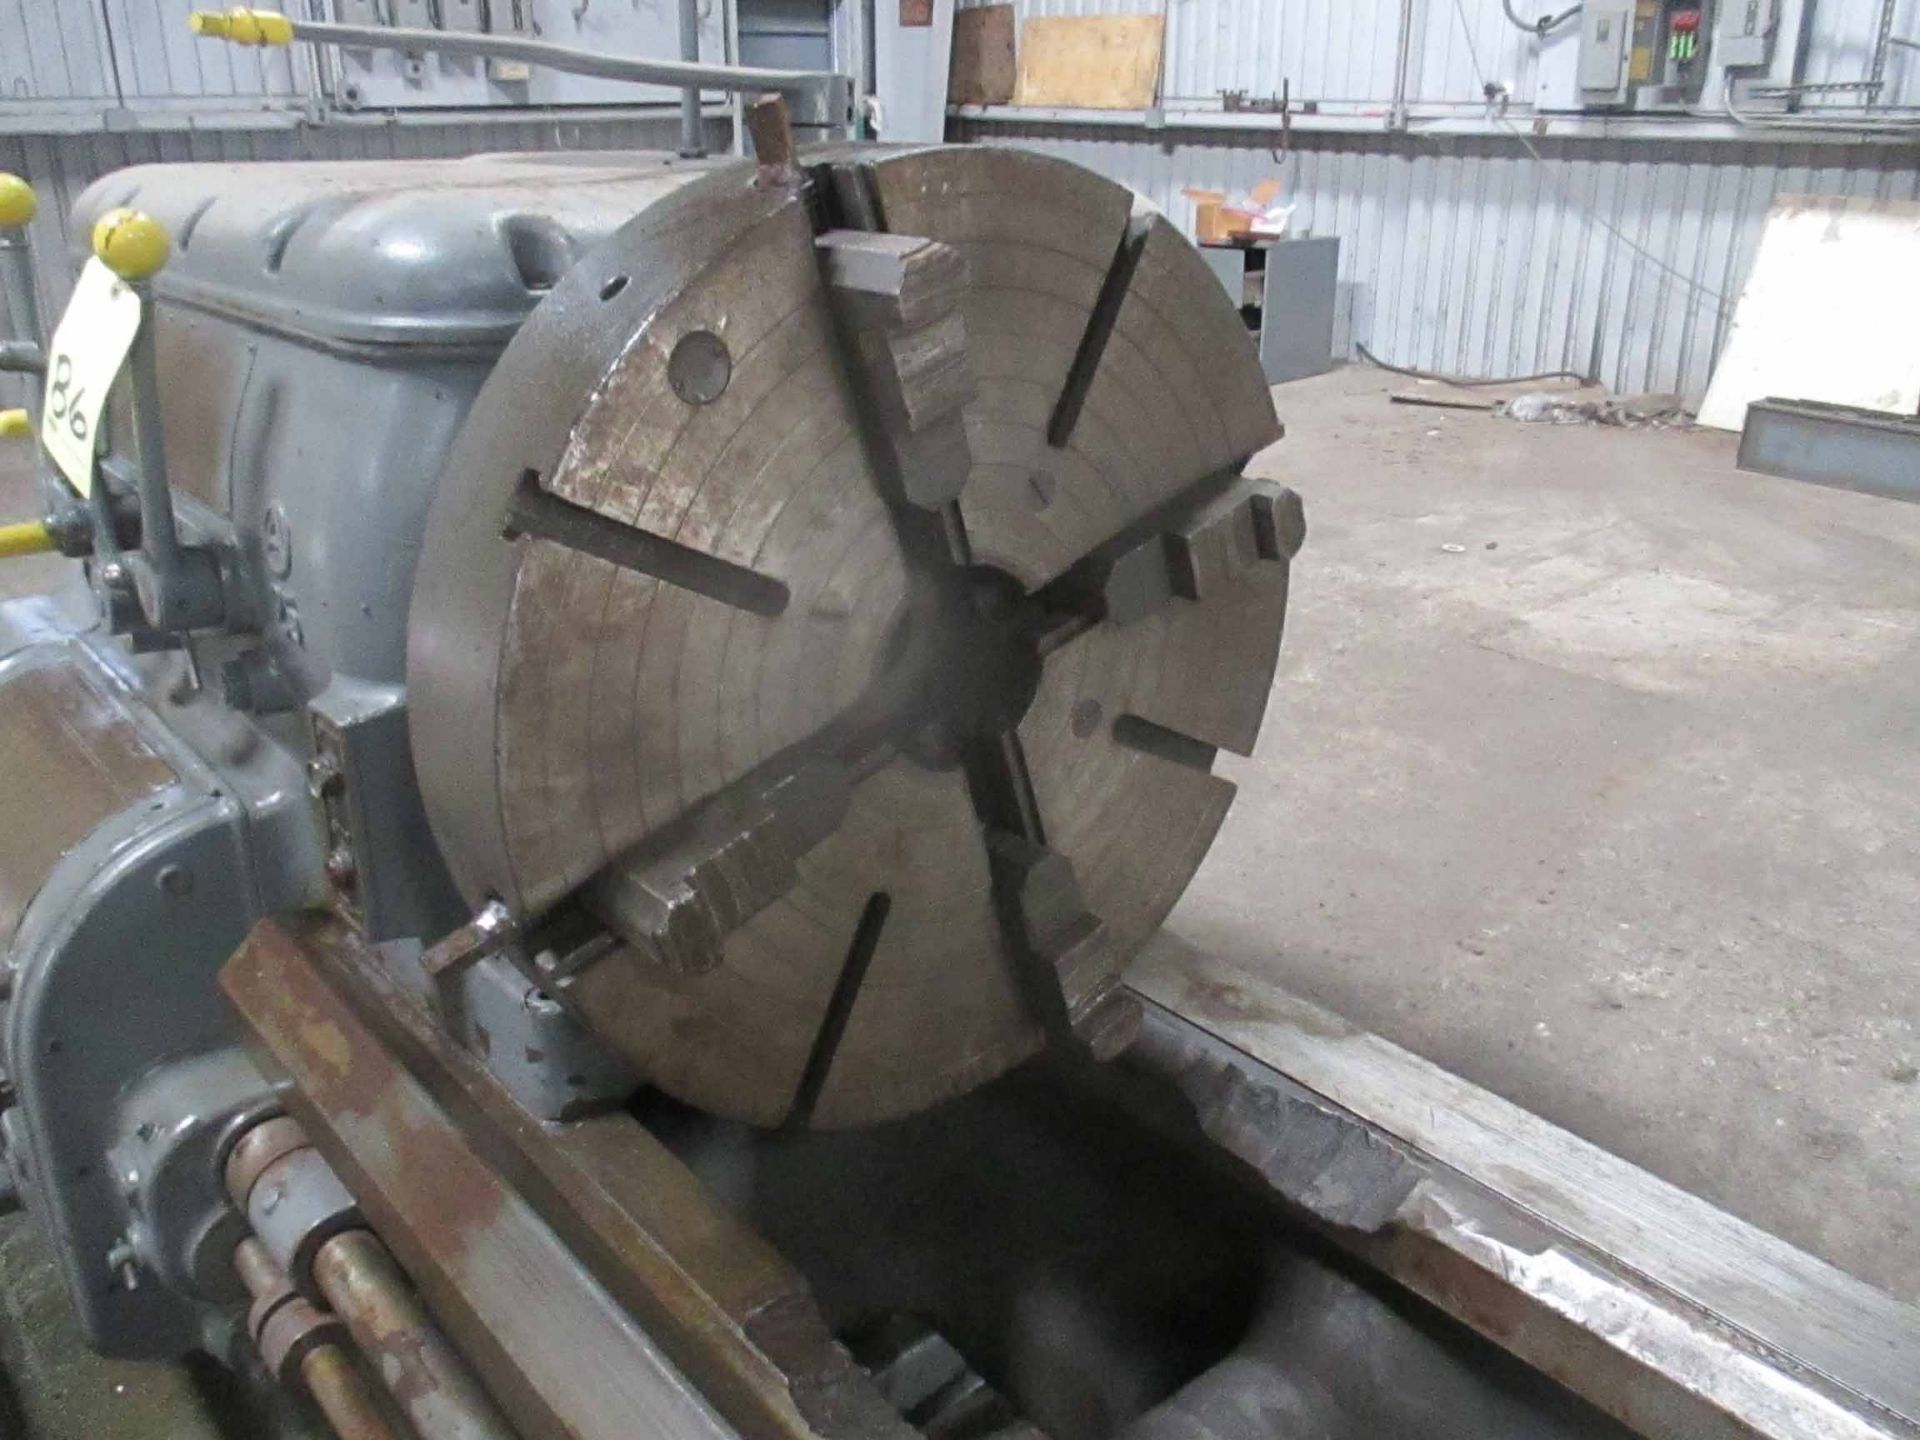 ENGINE LATHE, AXELSON MDL. 25, spds: 6-555 RPM, 24" dia. 4-jaw chuck, 72" centers, 28-3/4" sw. - Image 3 of 5